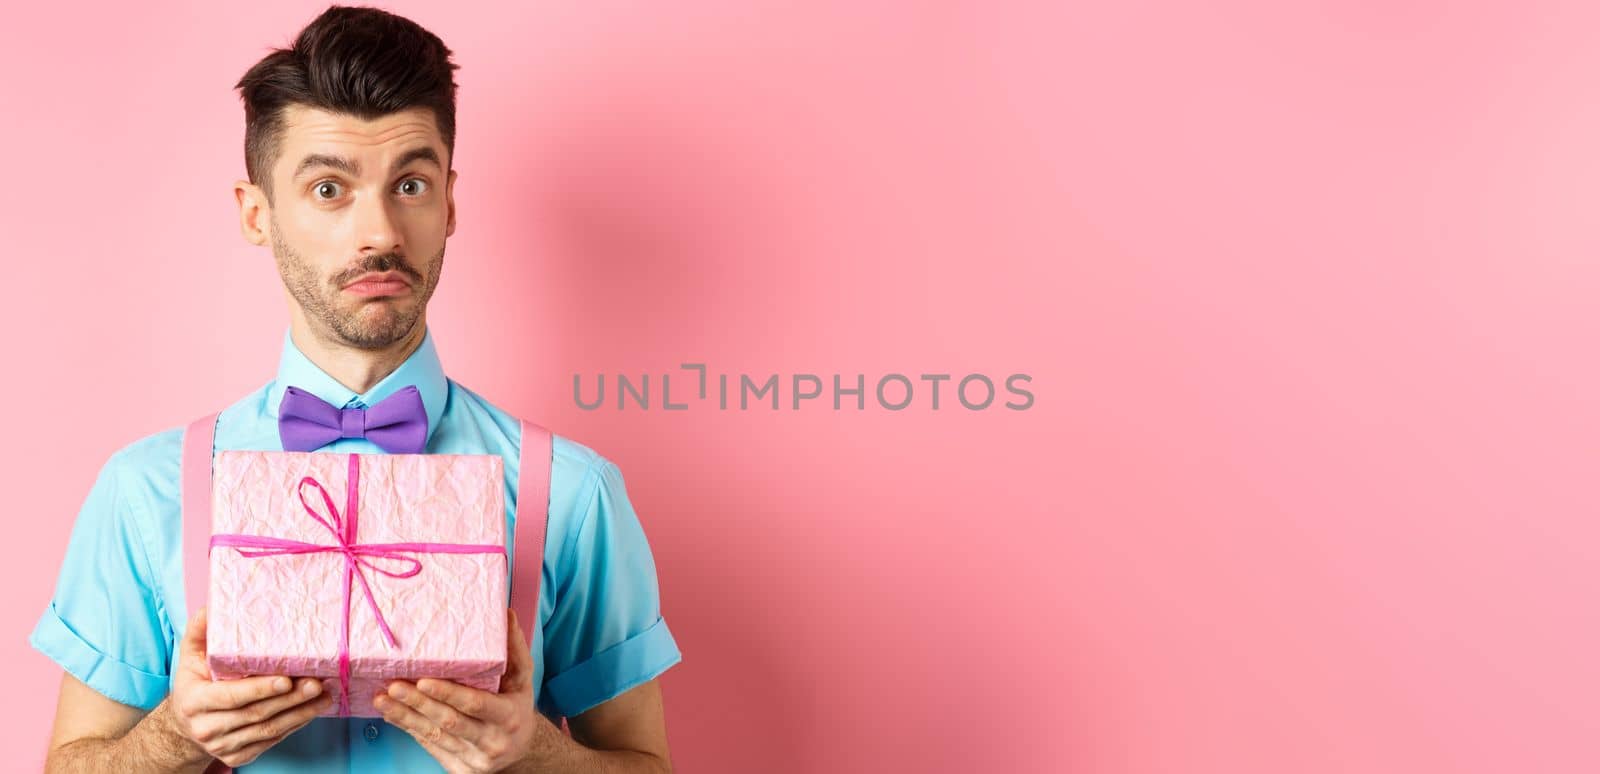 Holidays and celebration concept. Attractive young man with moustache, wearing festive outfit with bow-tie, showing cute gift box and looking at camera, standing over pink background.